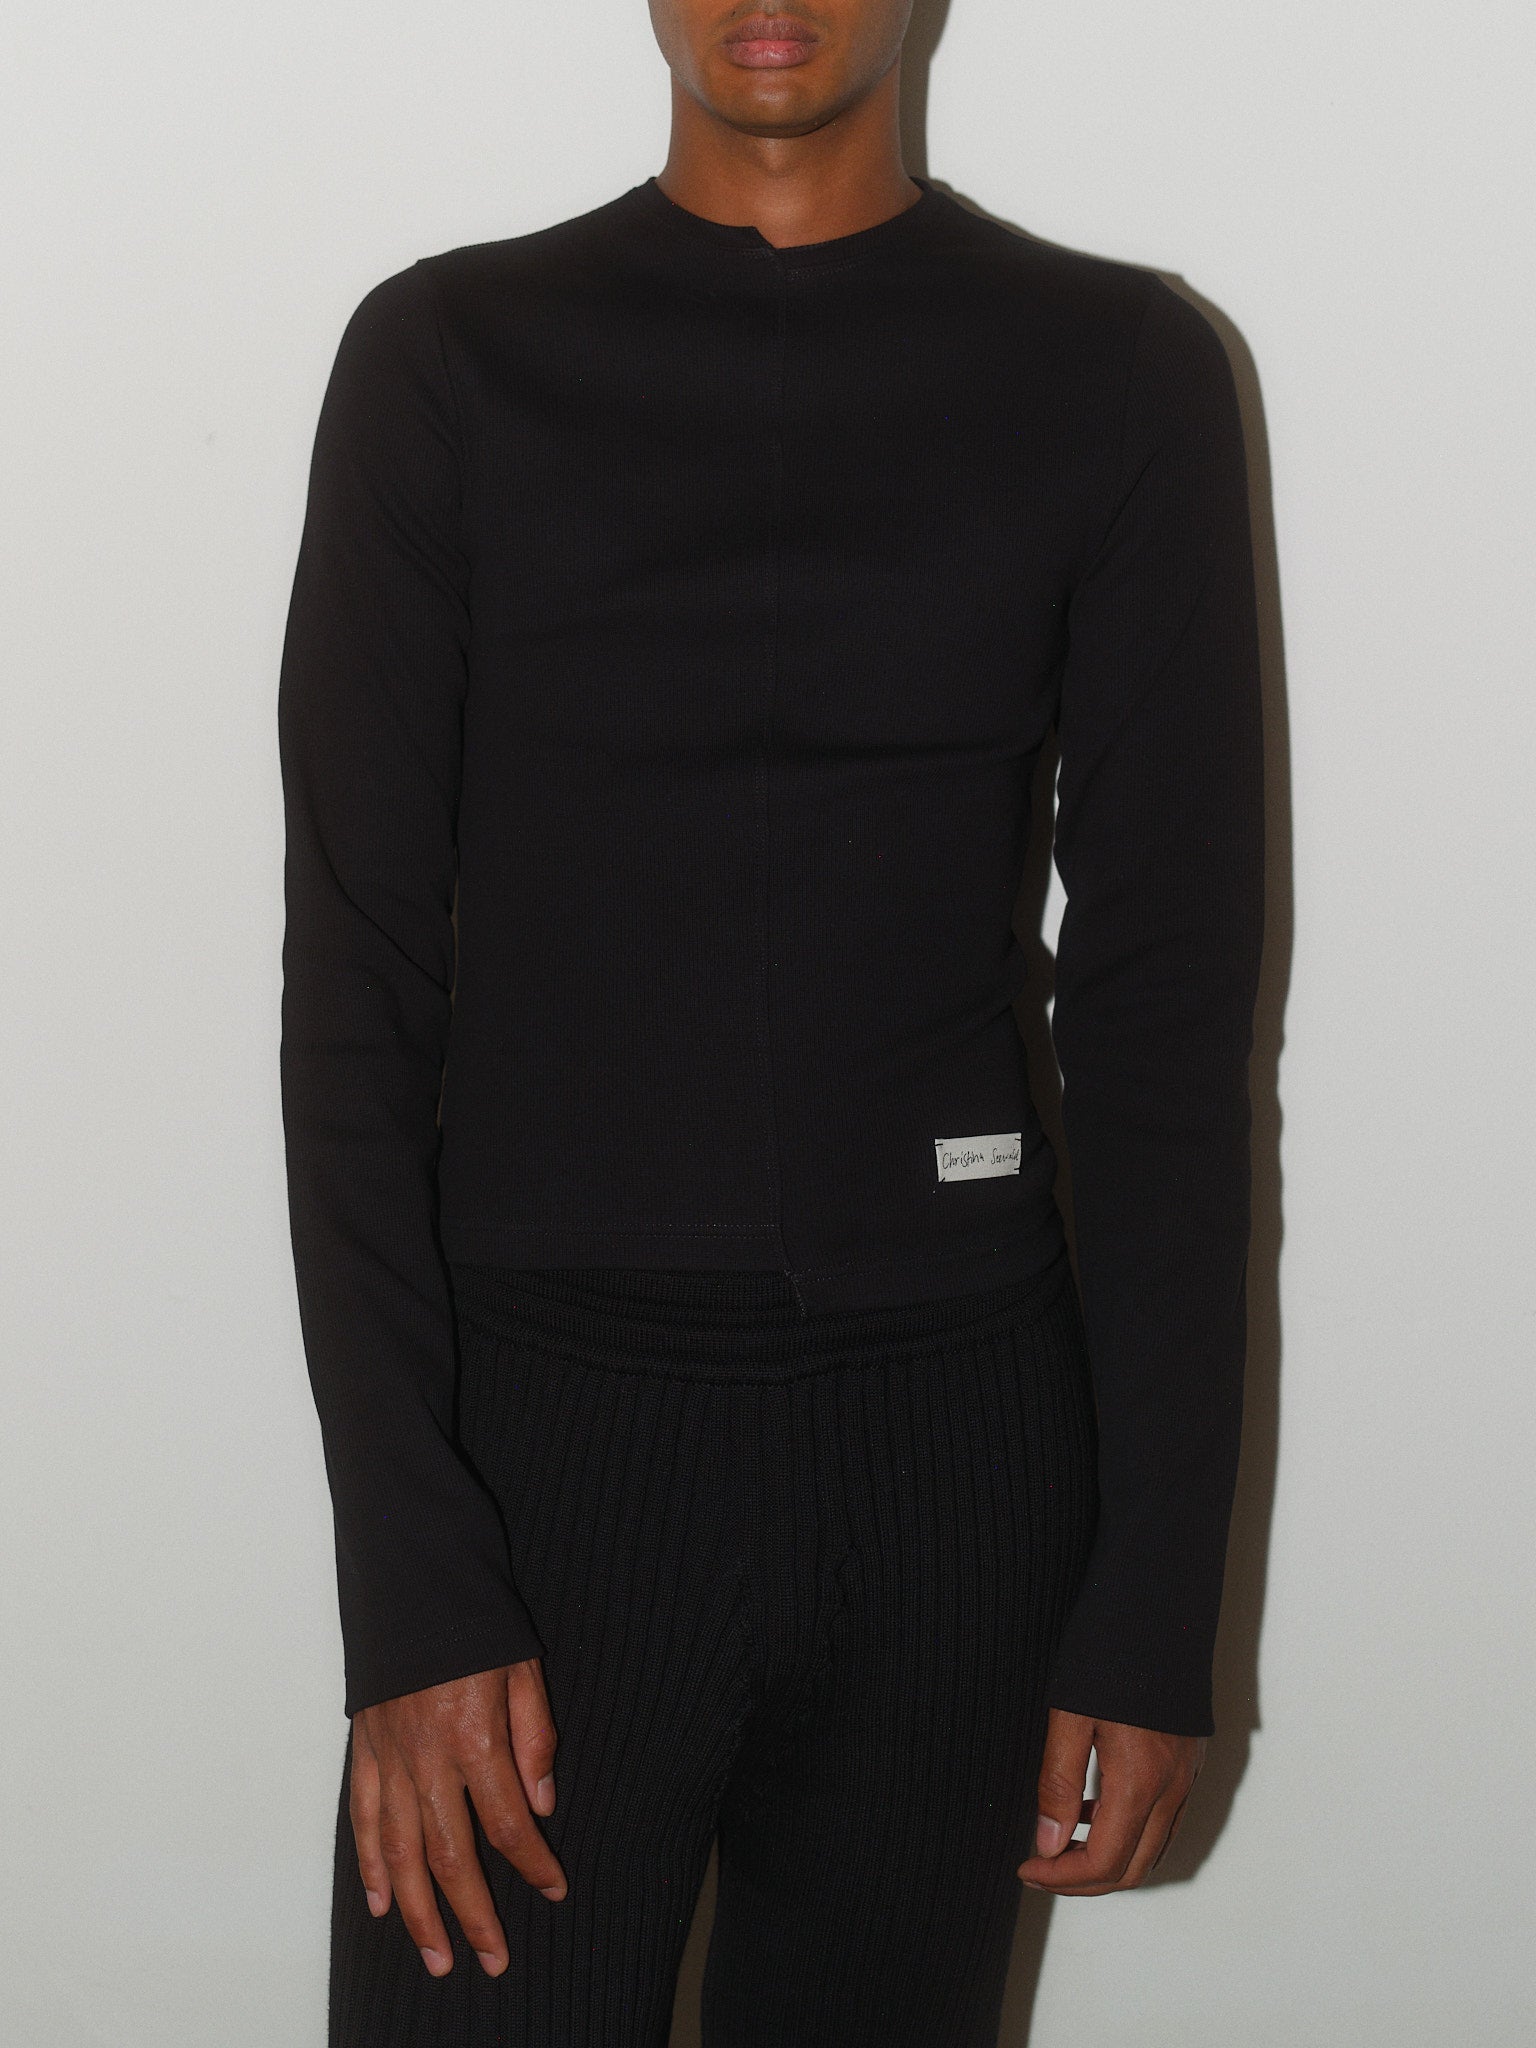 Cotton Jersey Longsleeve designed by Christina Seewald. Sustainable, designed and made in Europe.